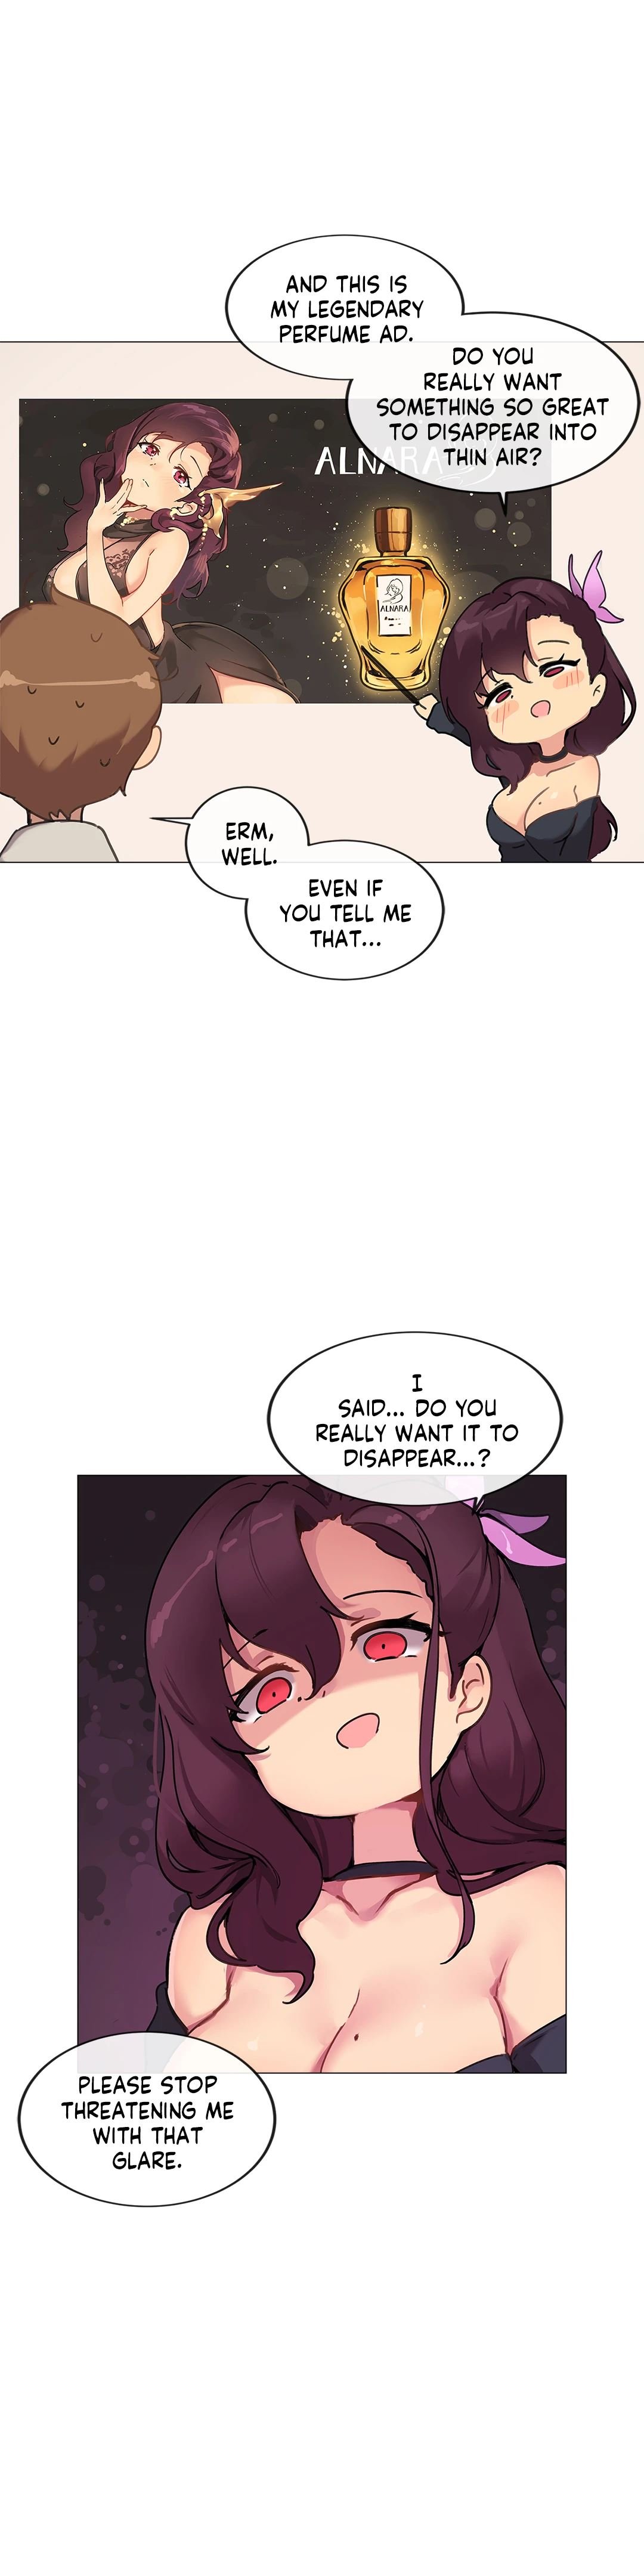 Sexcape Room: Wipe Out - Chapter 1 Page 27